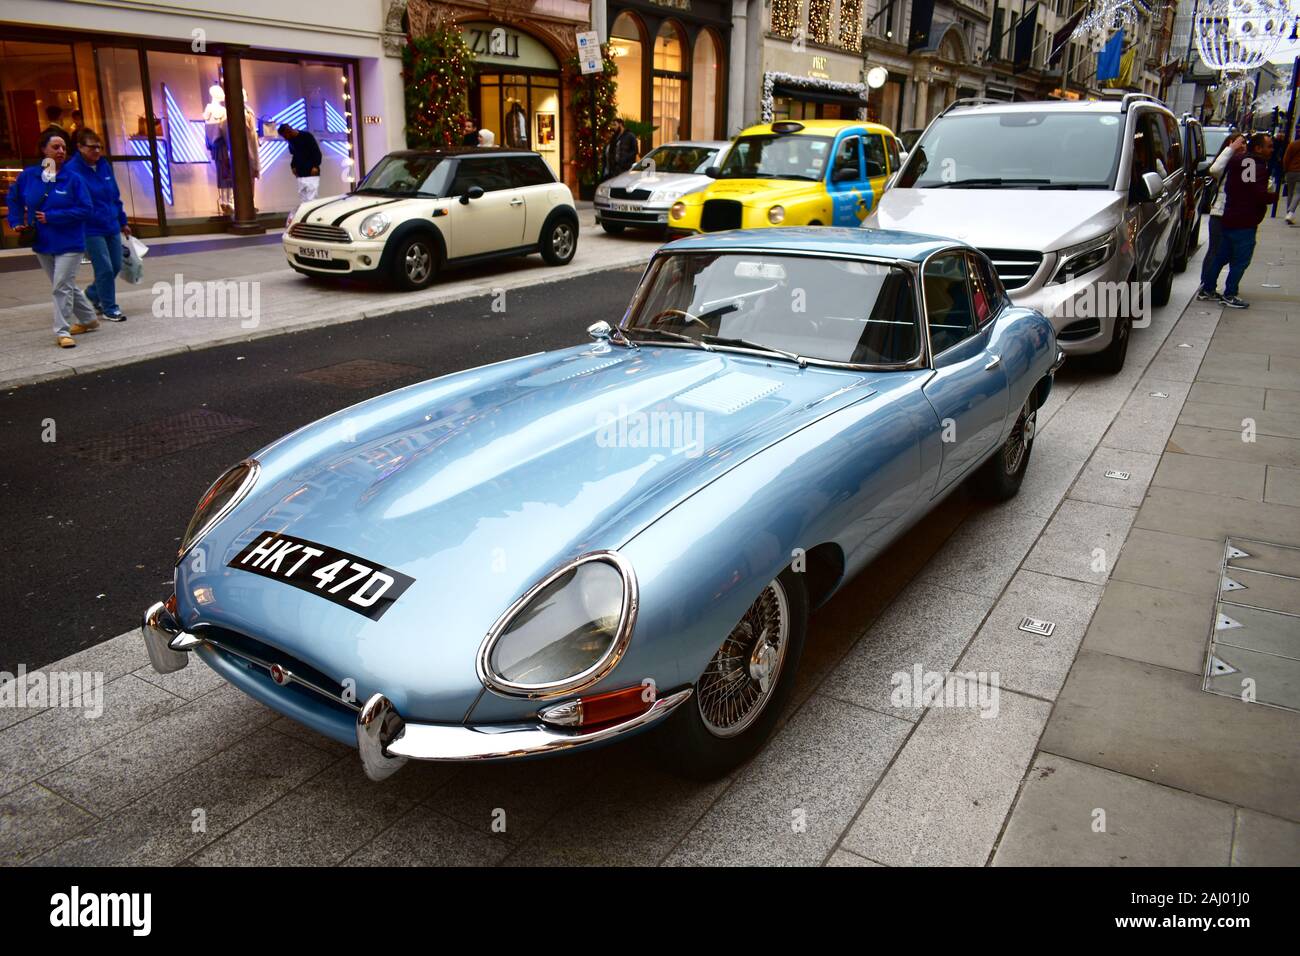 Christmas Classic Car High Resolution Stock Photography And Images Alamy